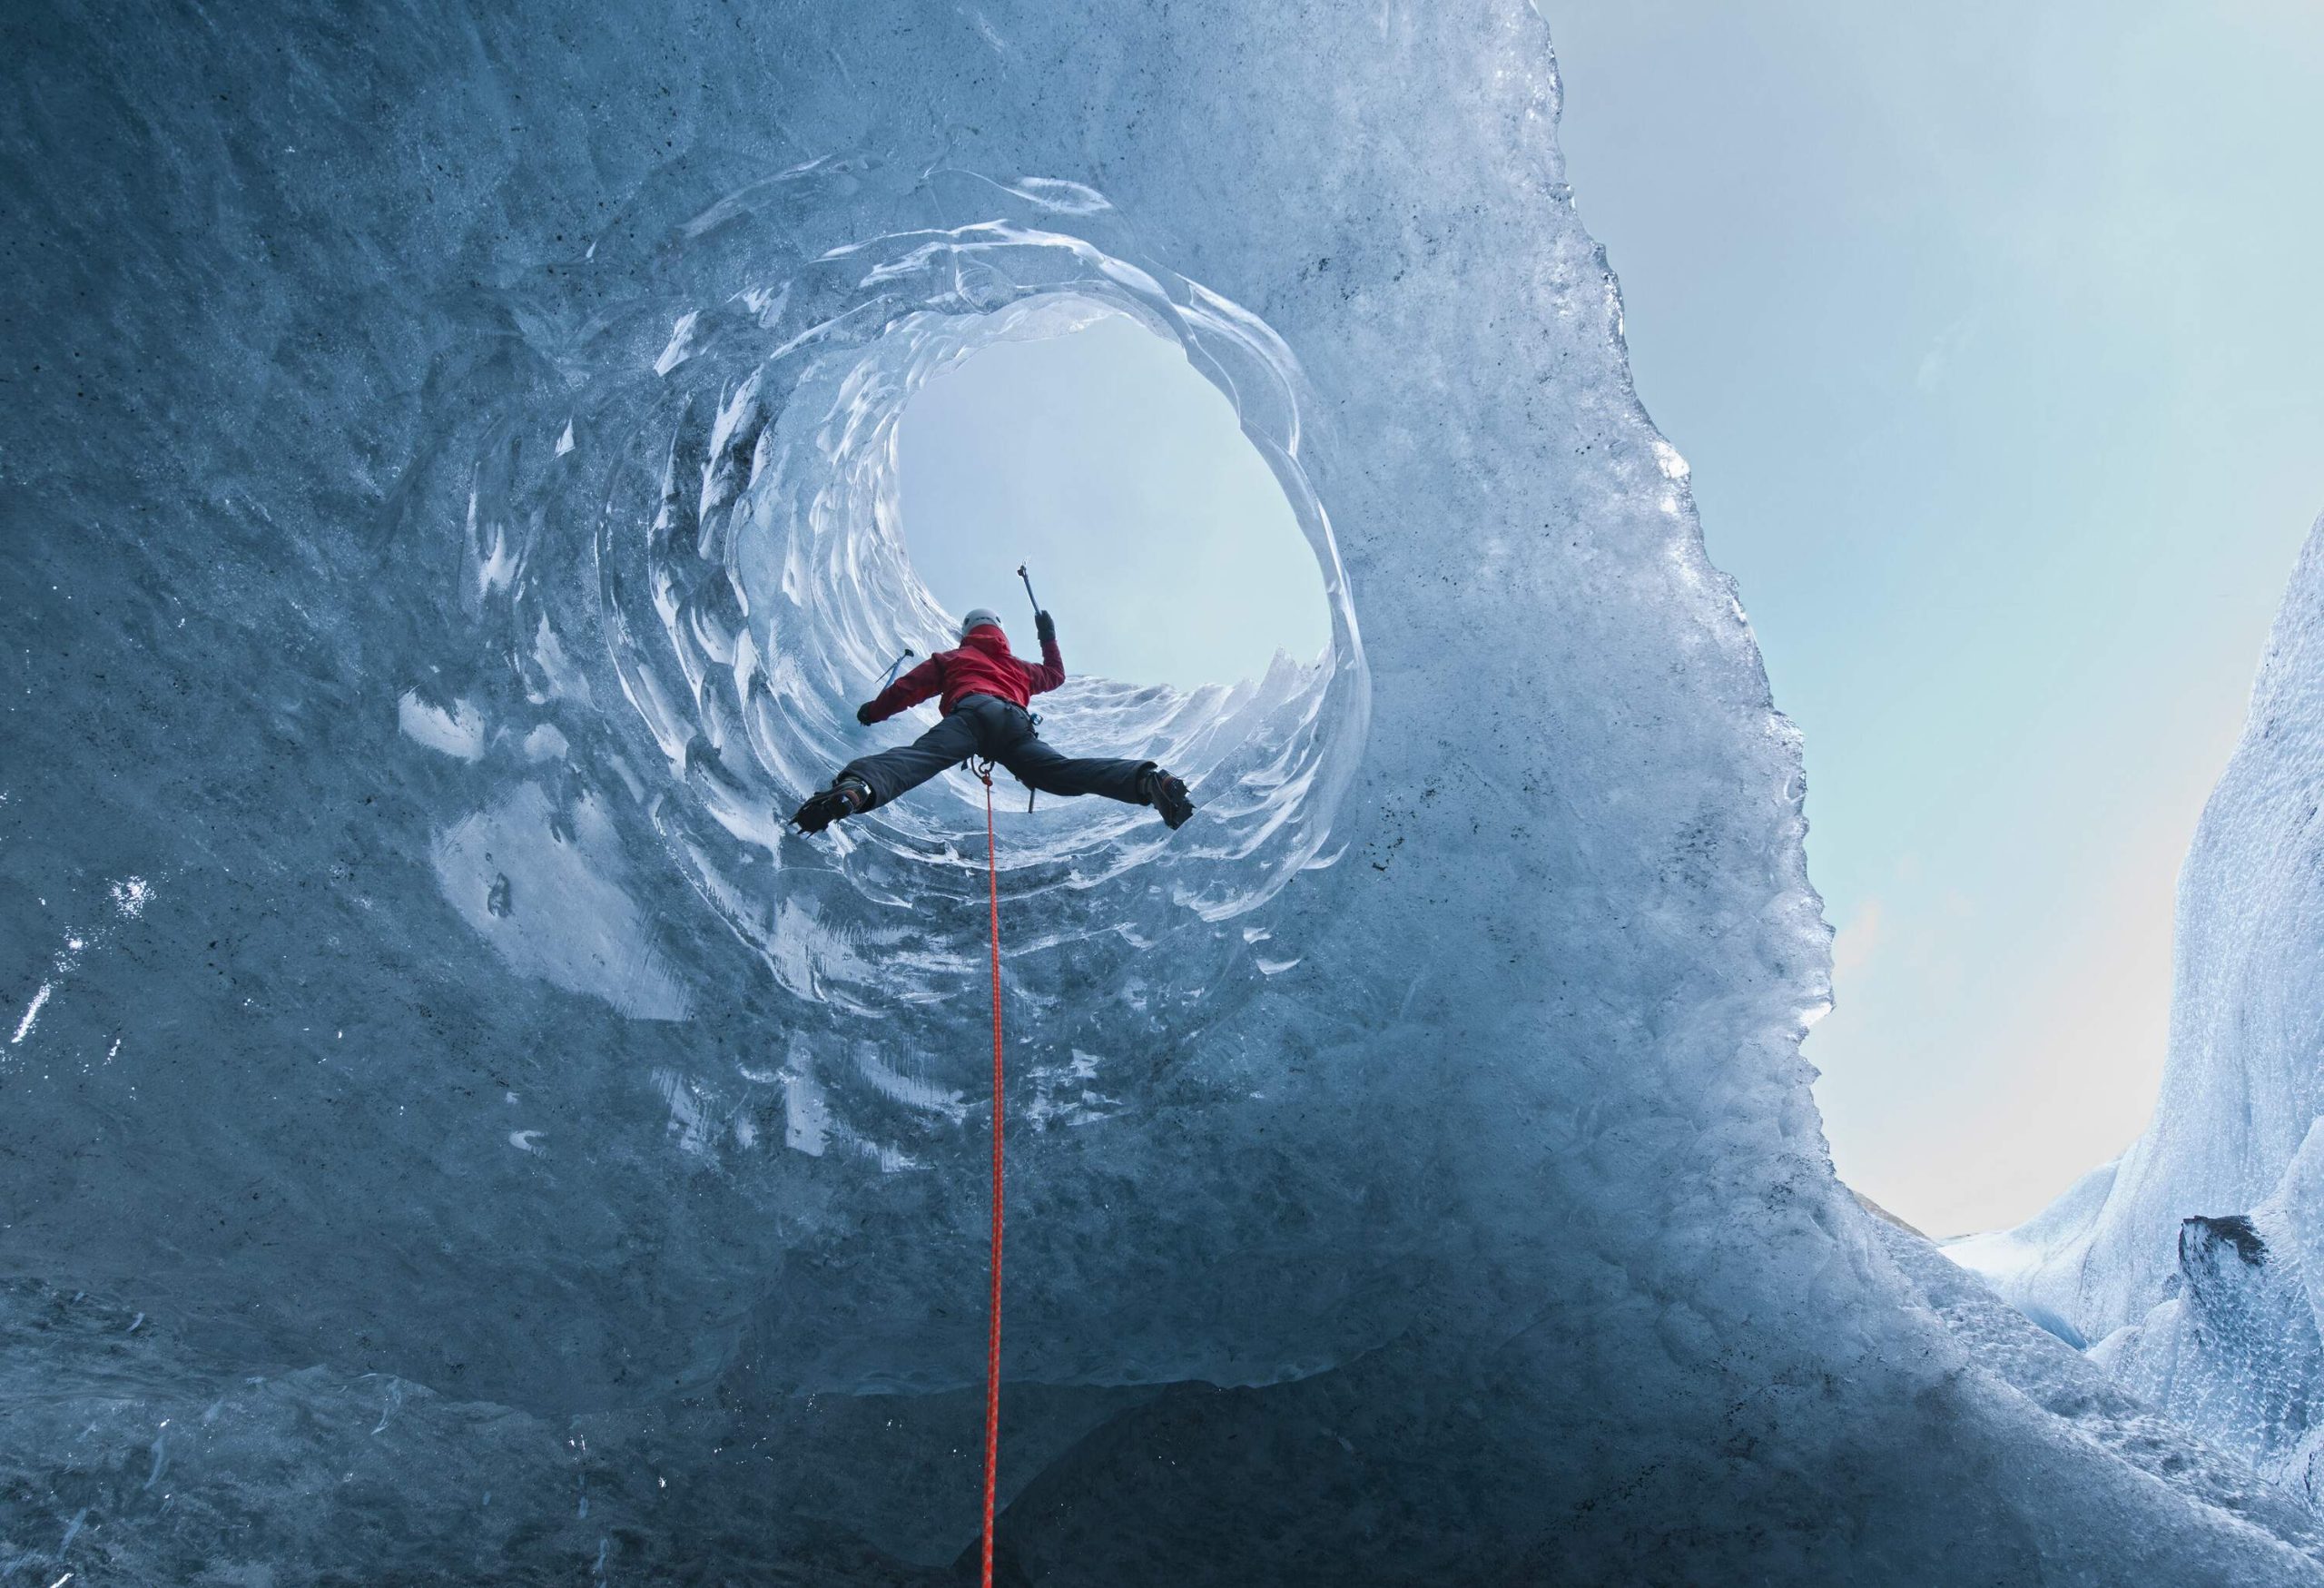 Lower view of person climbing ice